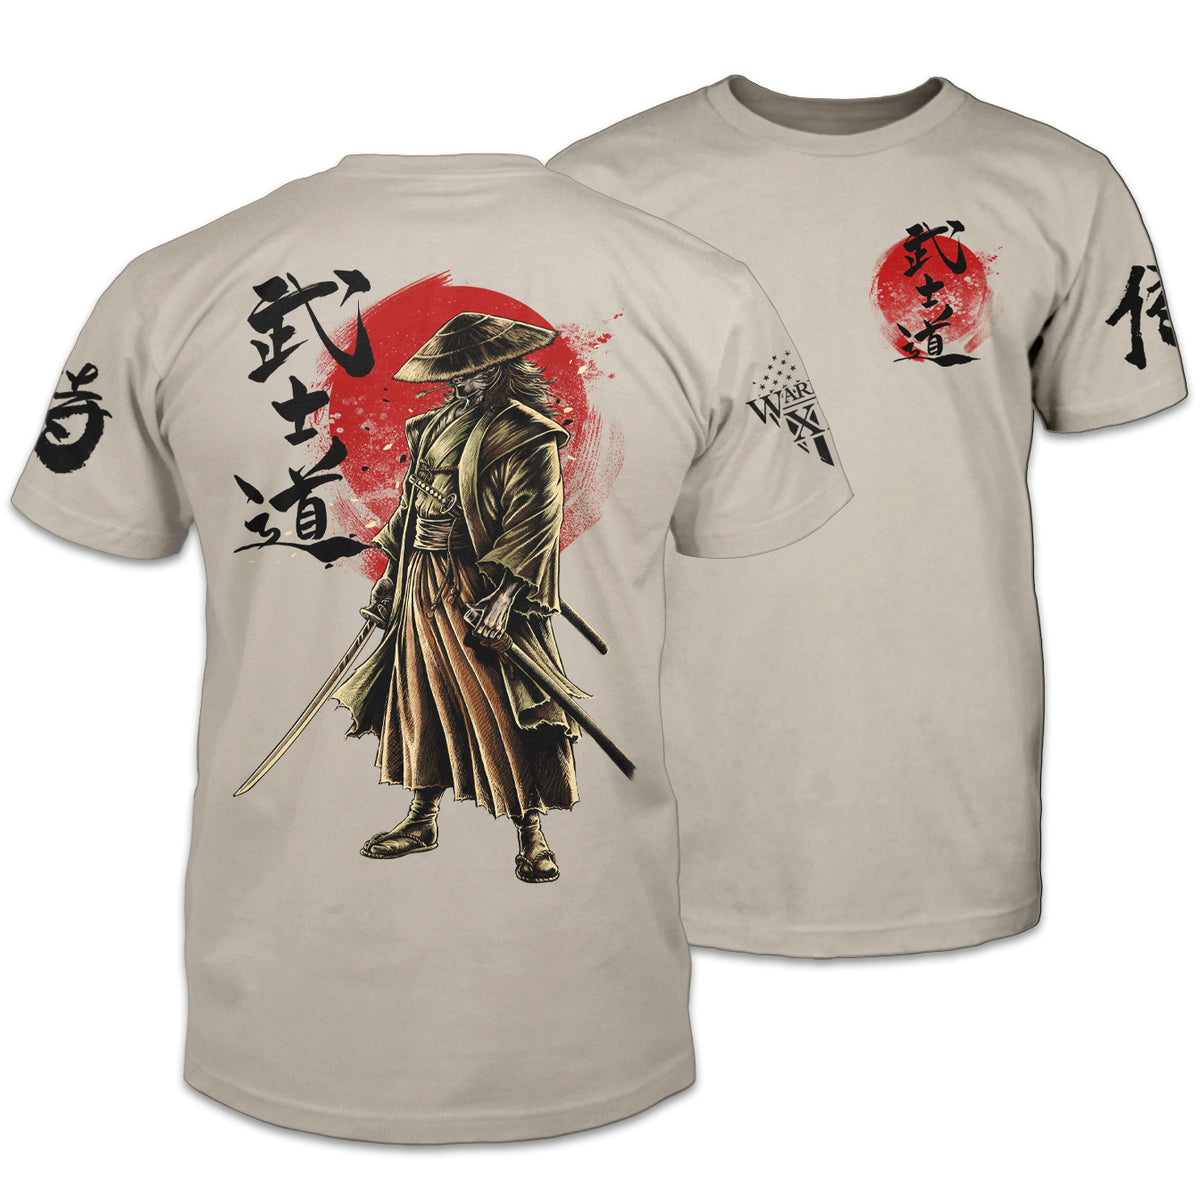 Front and back shirt with a samurai warrior printed on the back of a light tan t-shirt. 